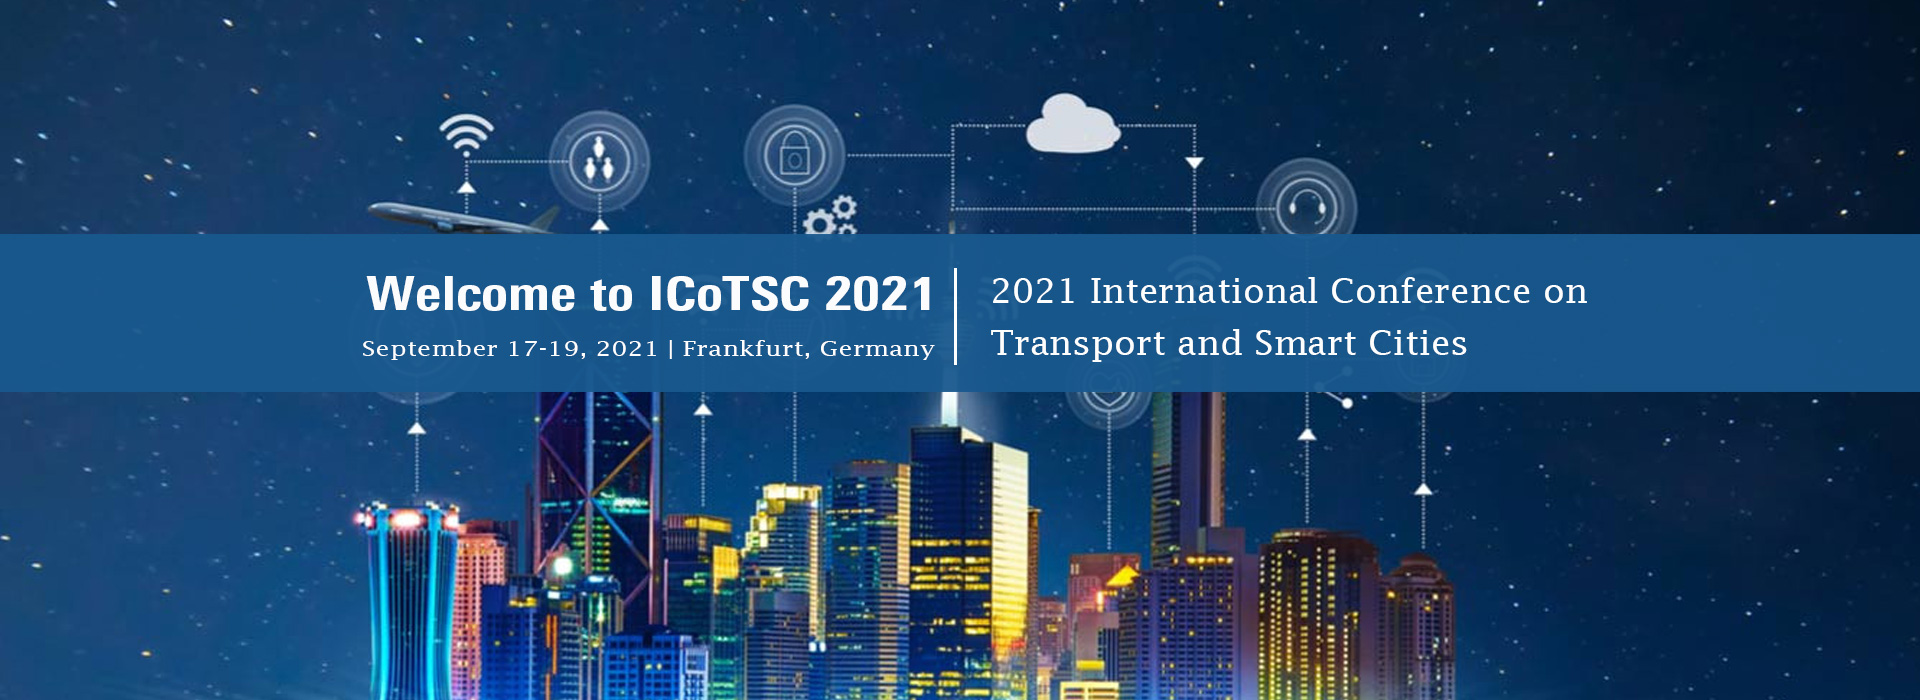 International Conference on Transport and Smart Cities